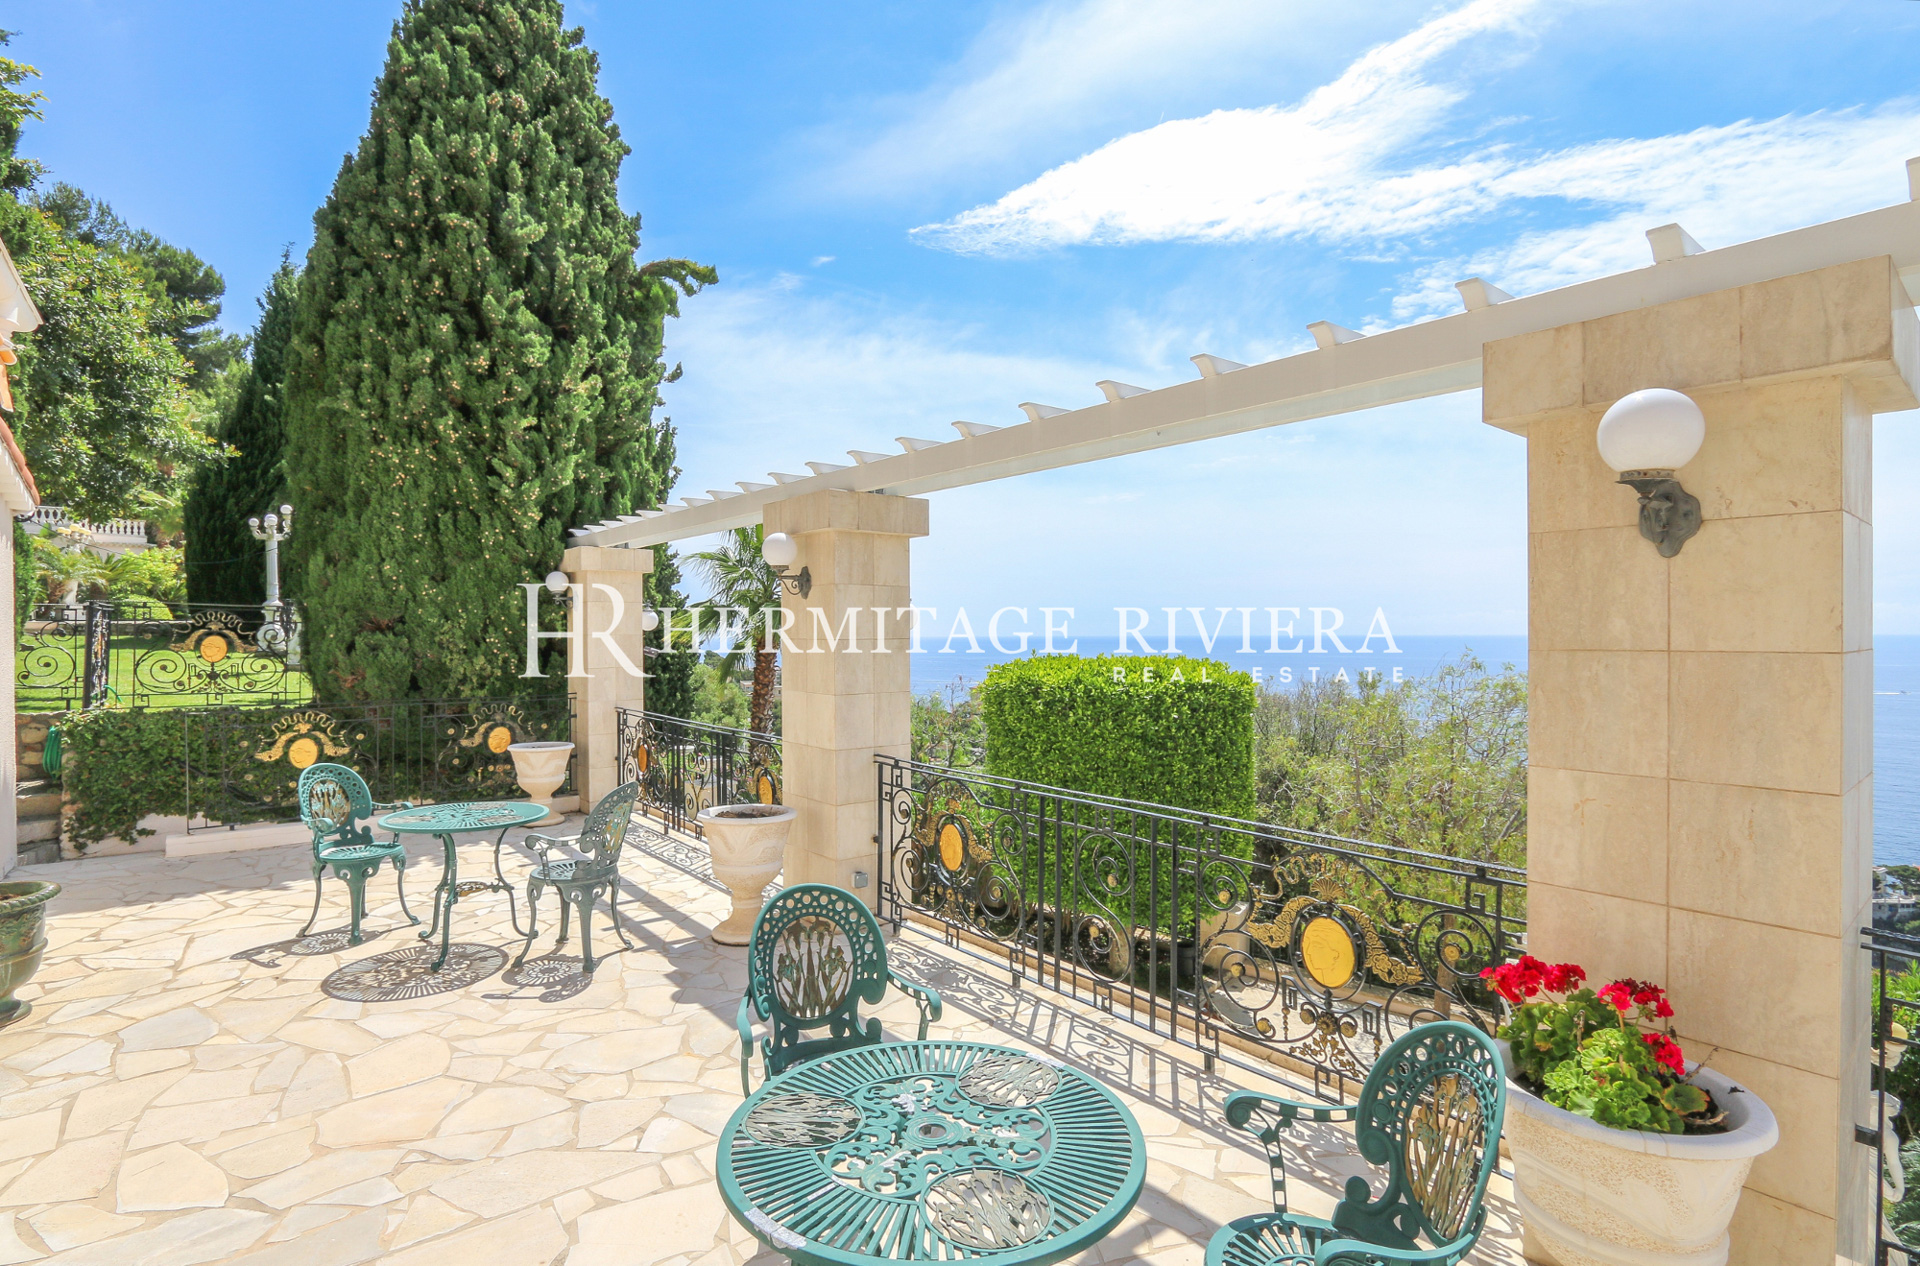 Property close Monaco with panoramic view (image 24)